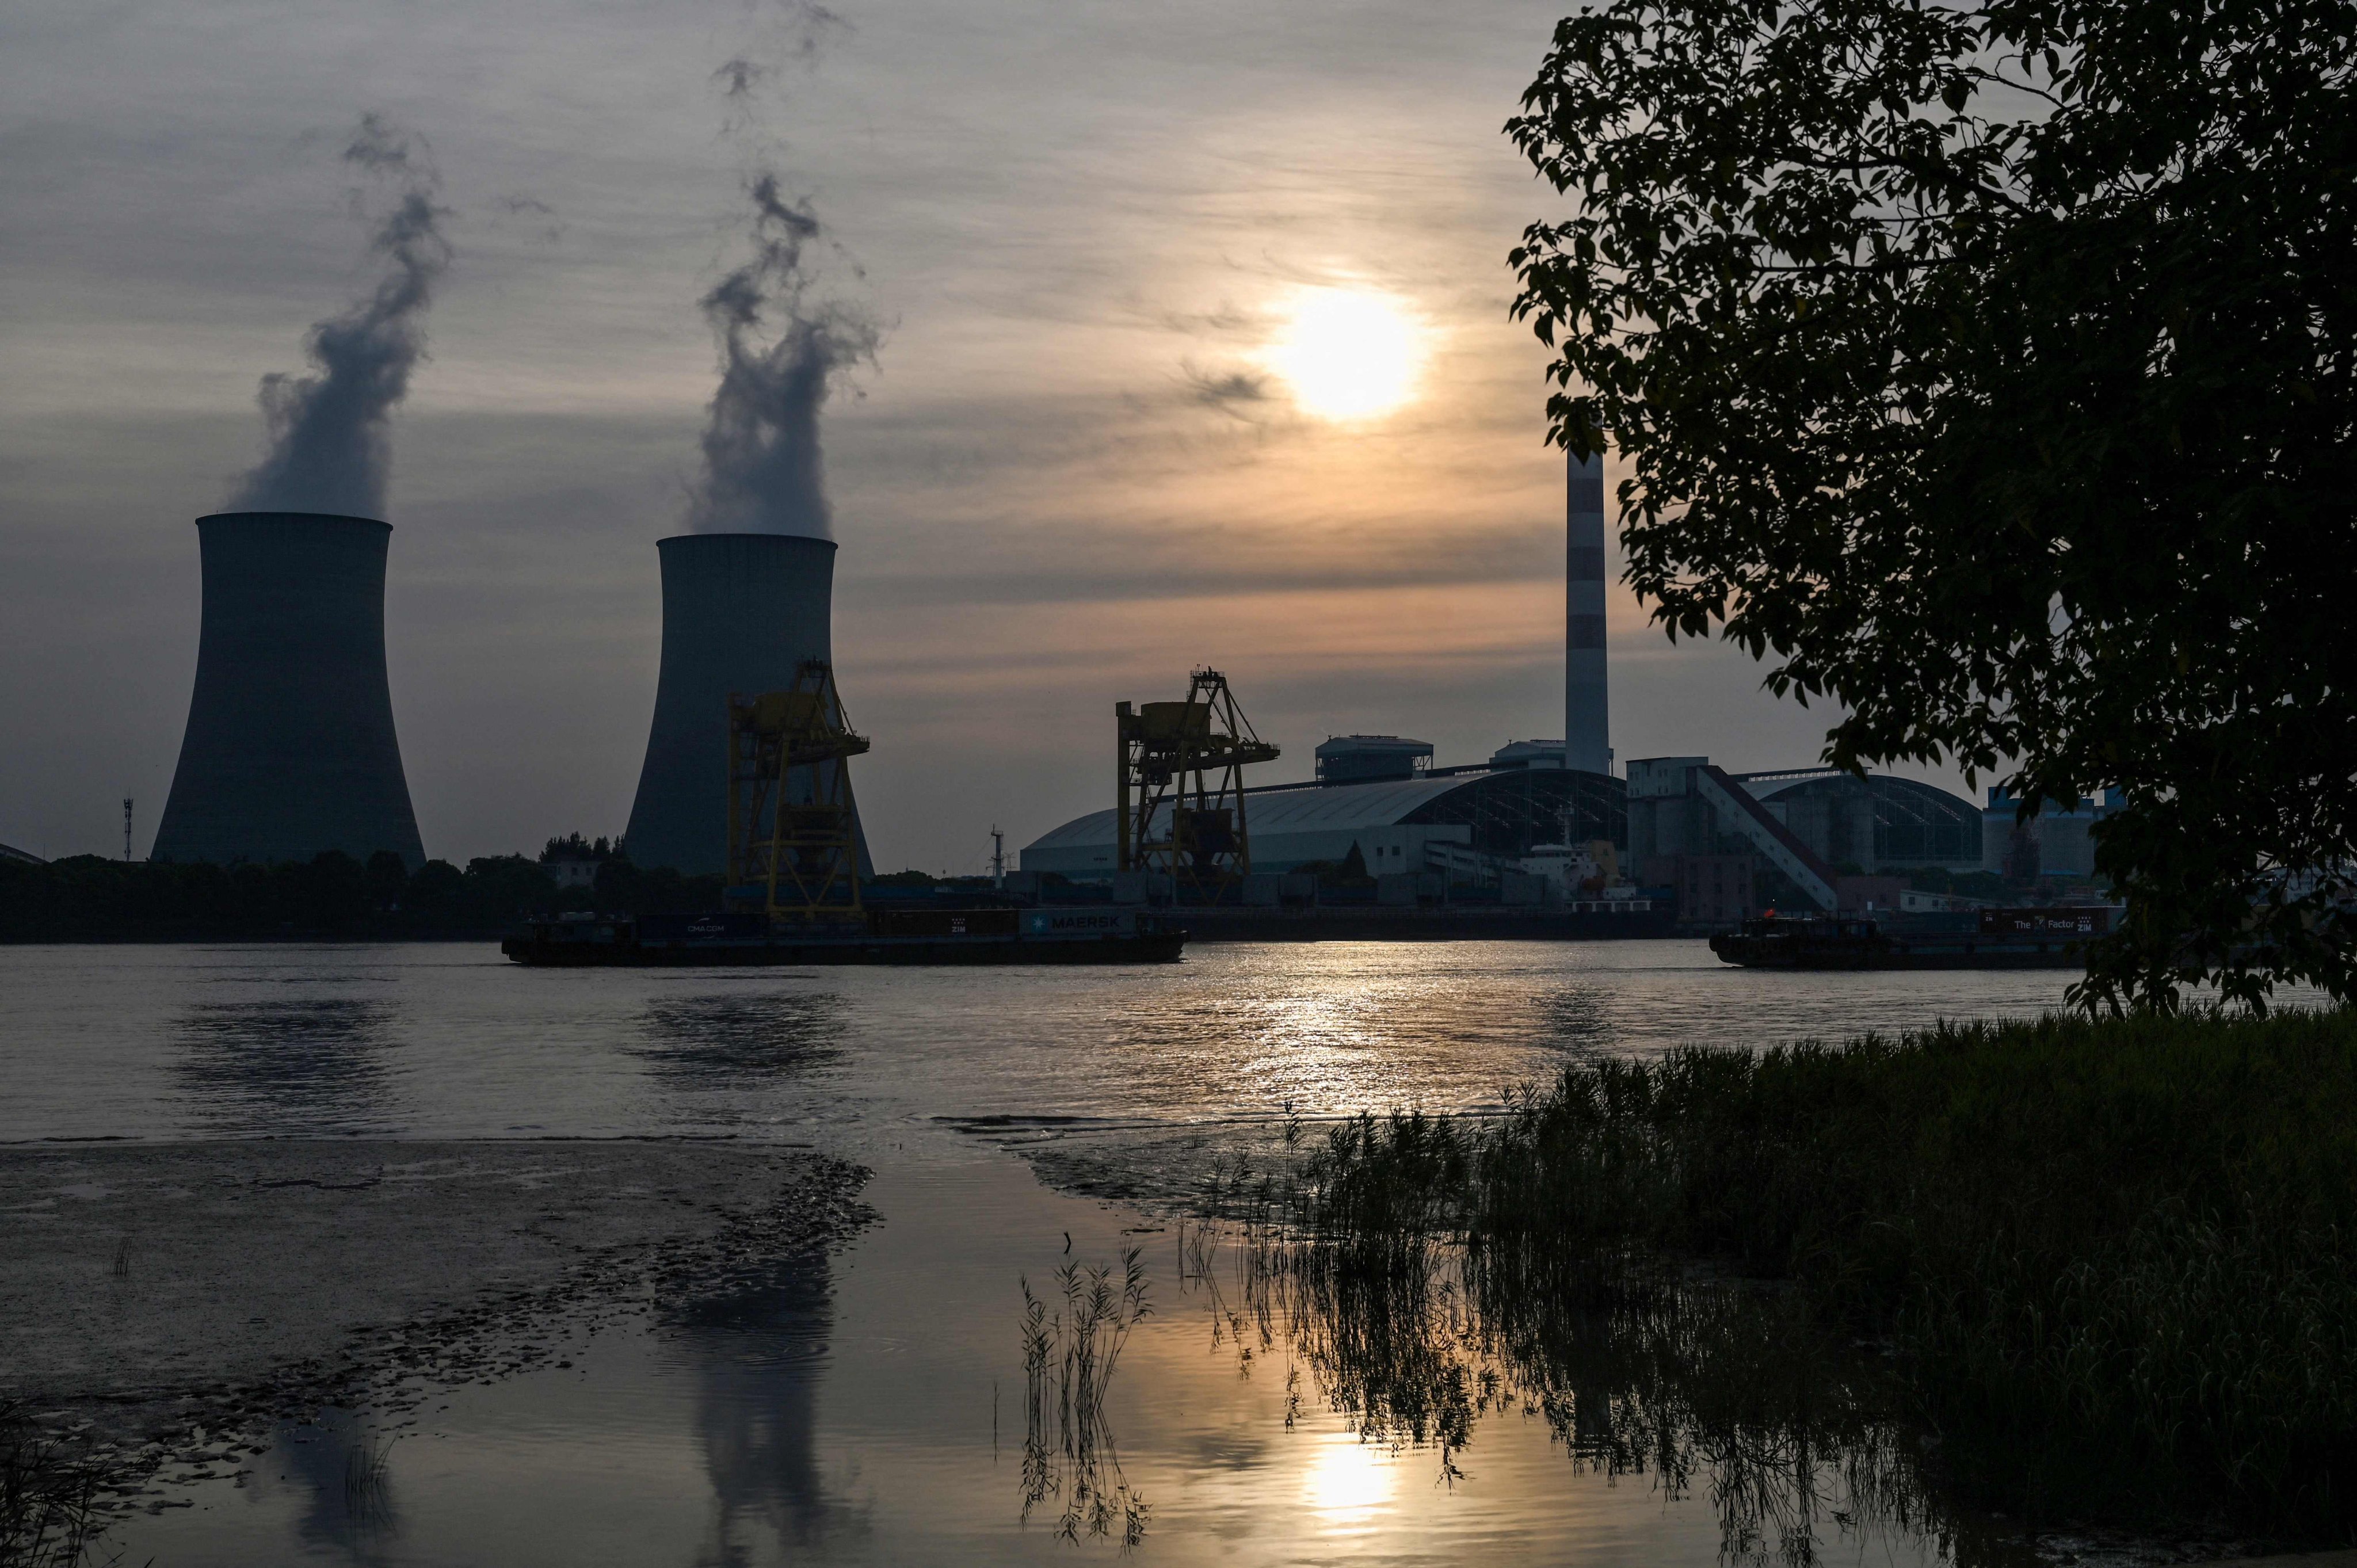 The Wujing coal power station is pictured across the Huangpu River, in the Minhang district of Shanghai, on August 22. China’s coal output hit record levels earlier this year. Photo: AFP